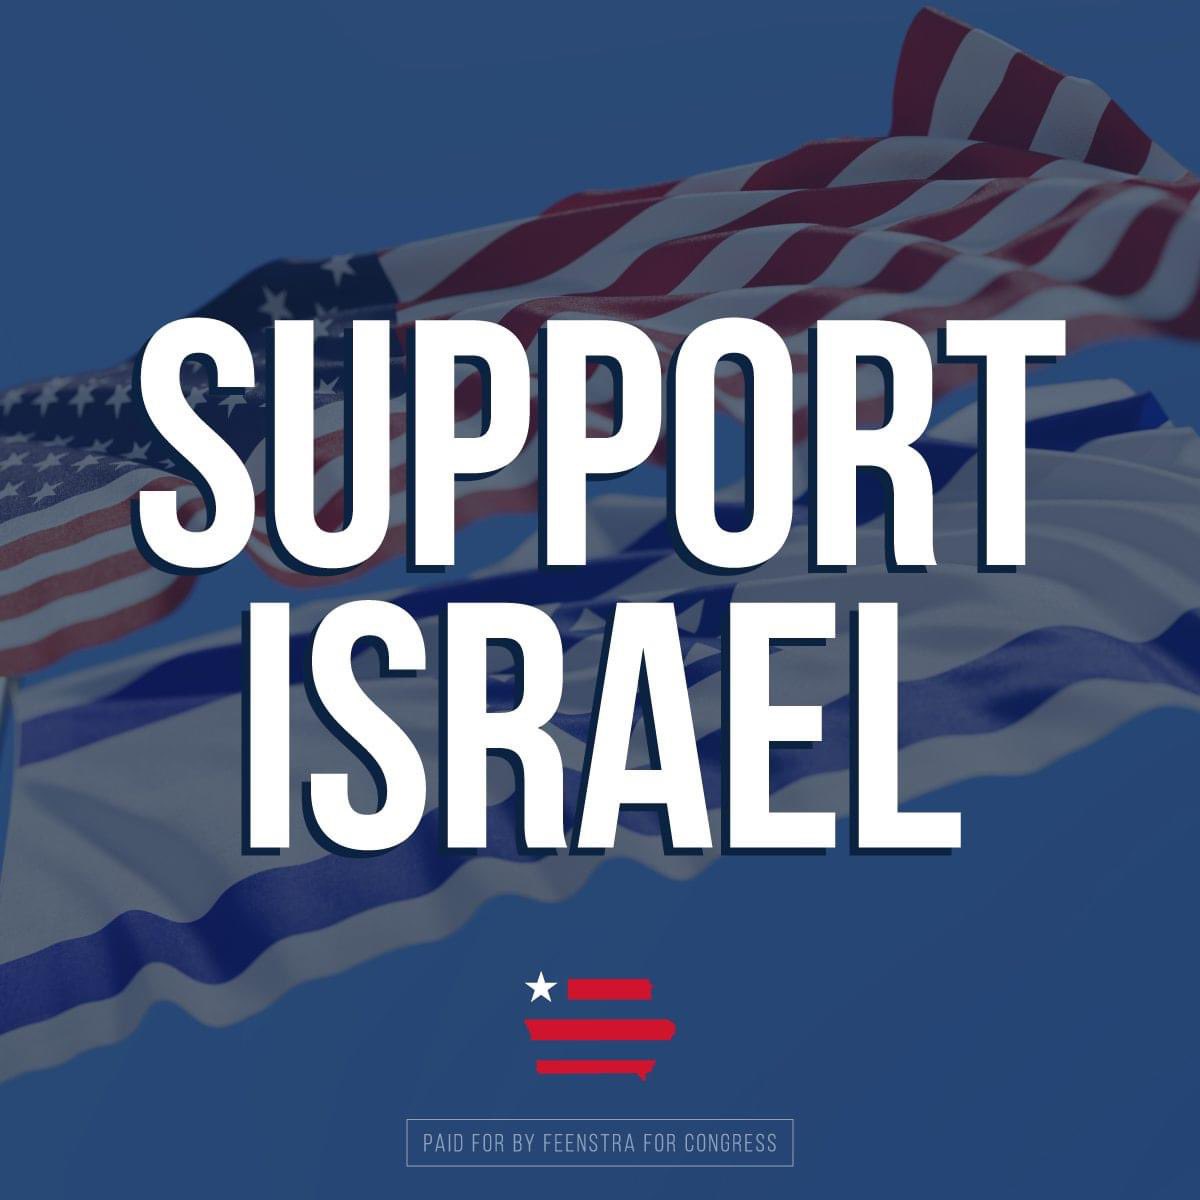 Israel is our strongest friend and ally in the Middle East. While terrorists funded by Iran threaten Israel’s existence, there’s no question where I stand. I stand with Israel 100%.